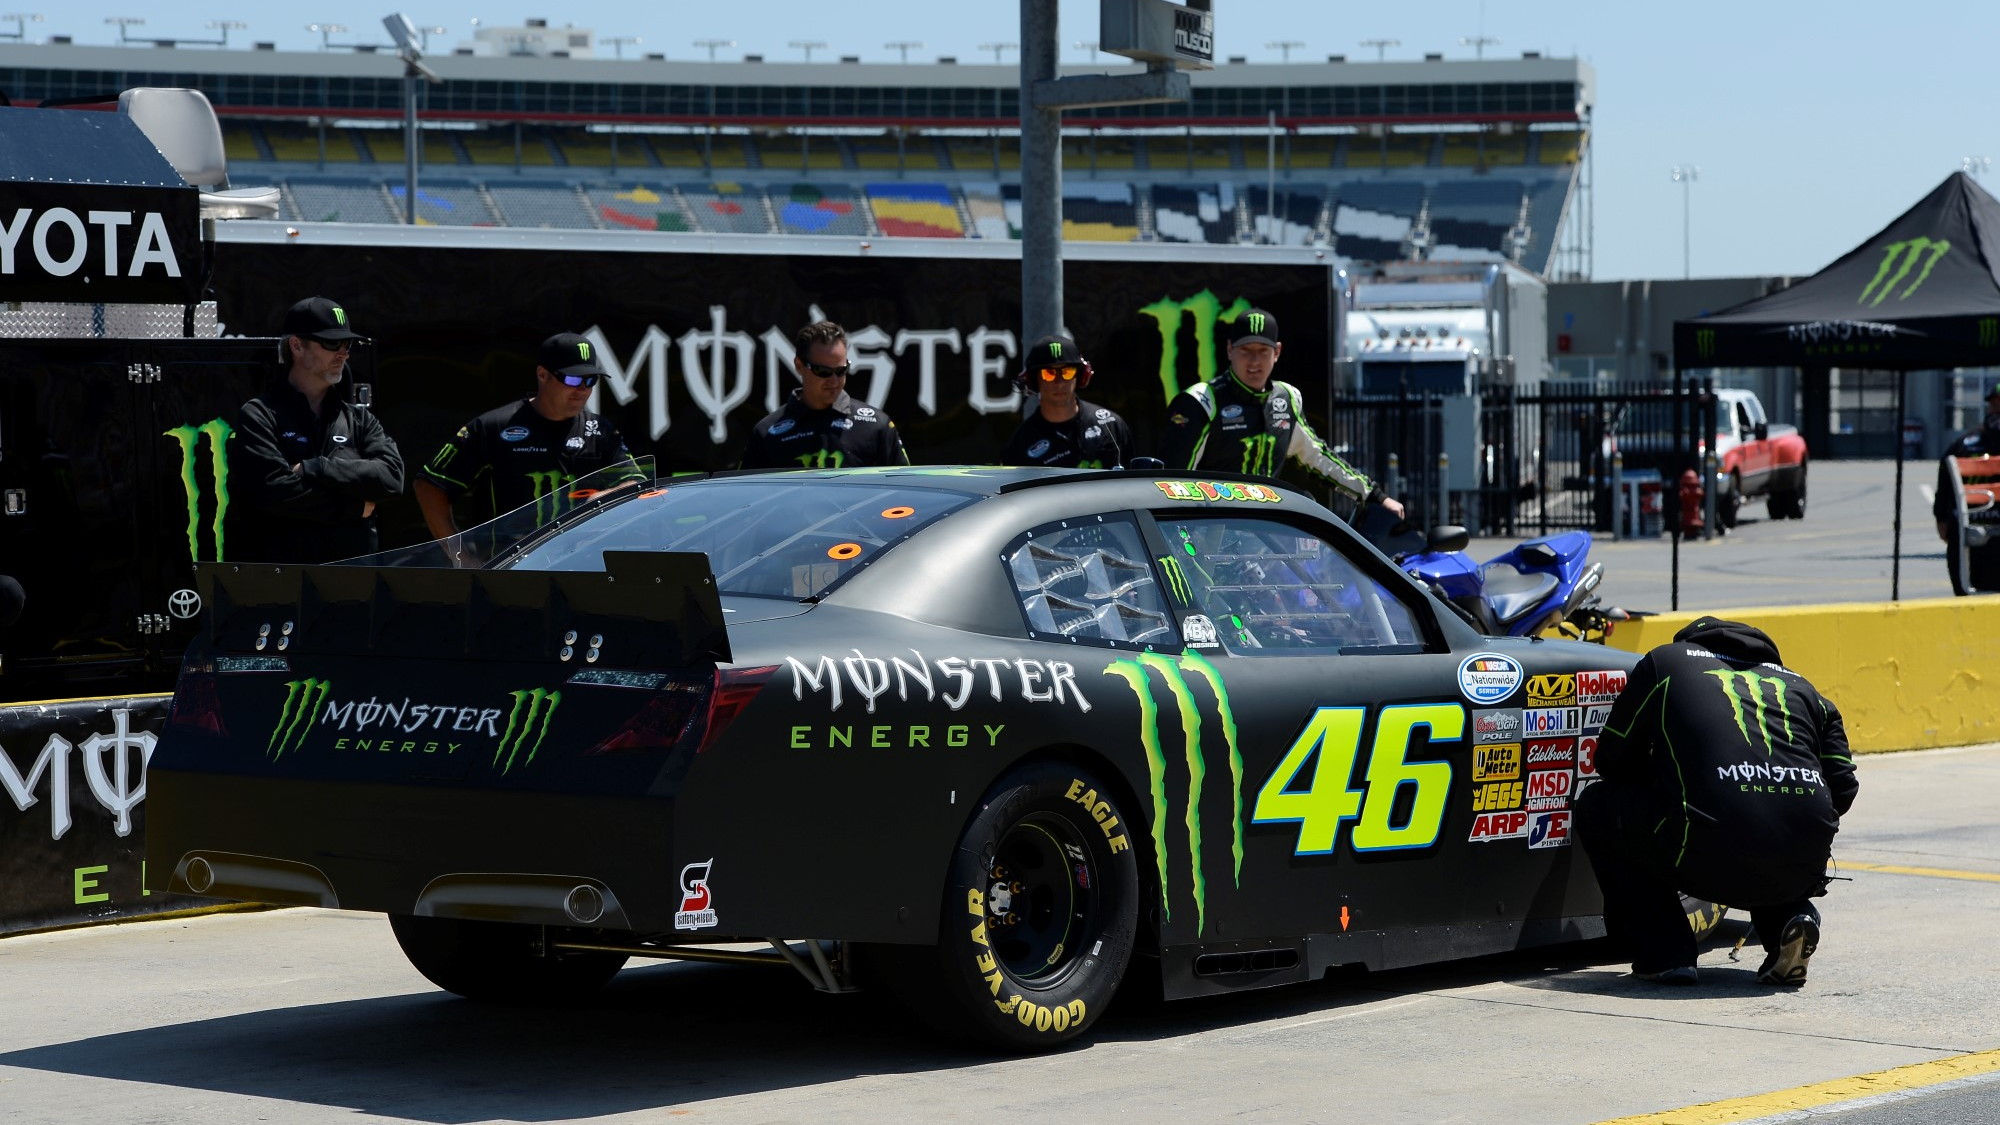 Valentino Rossi tests Kyle Busch's NASCAR Nationwide Toyota Camry